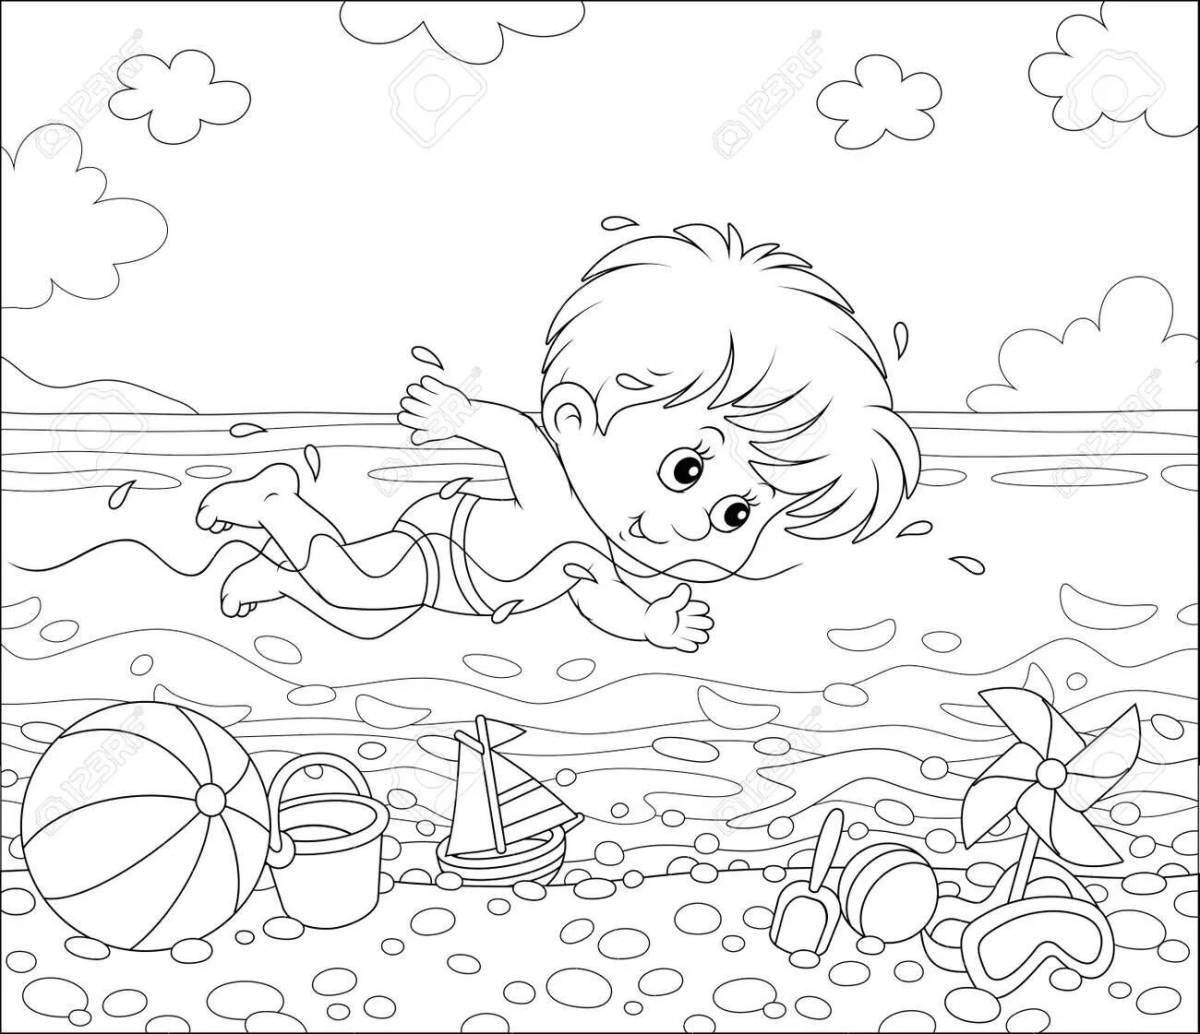 Playful swimming coloring page for babies